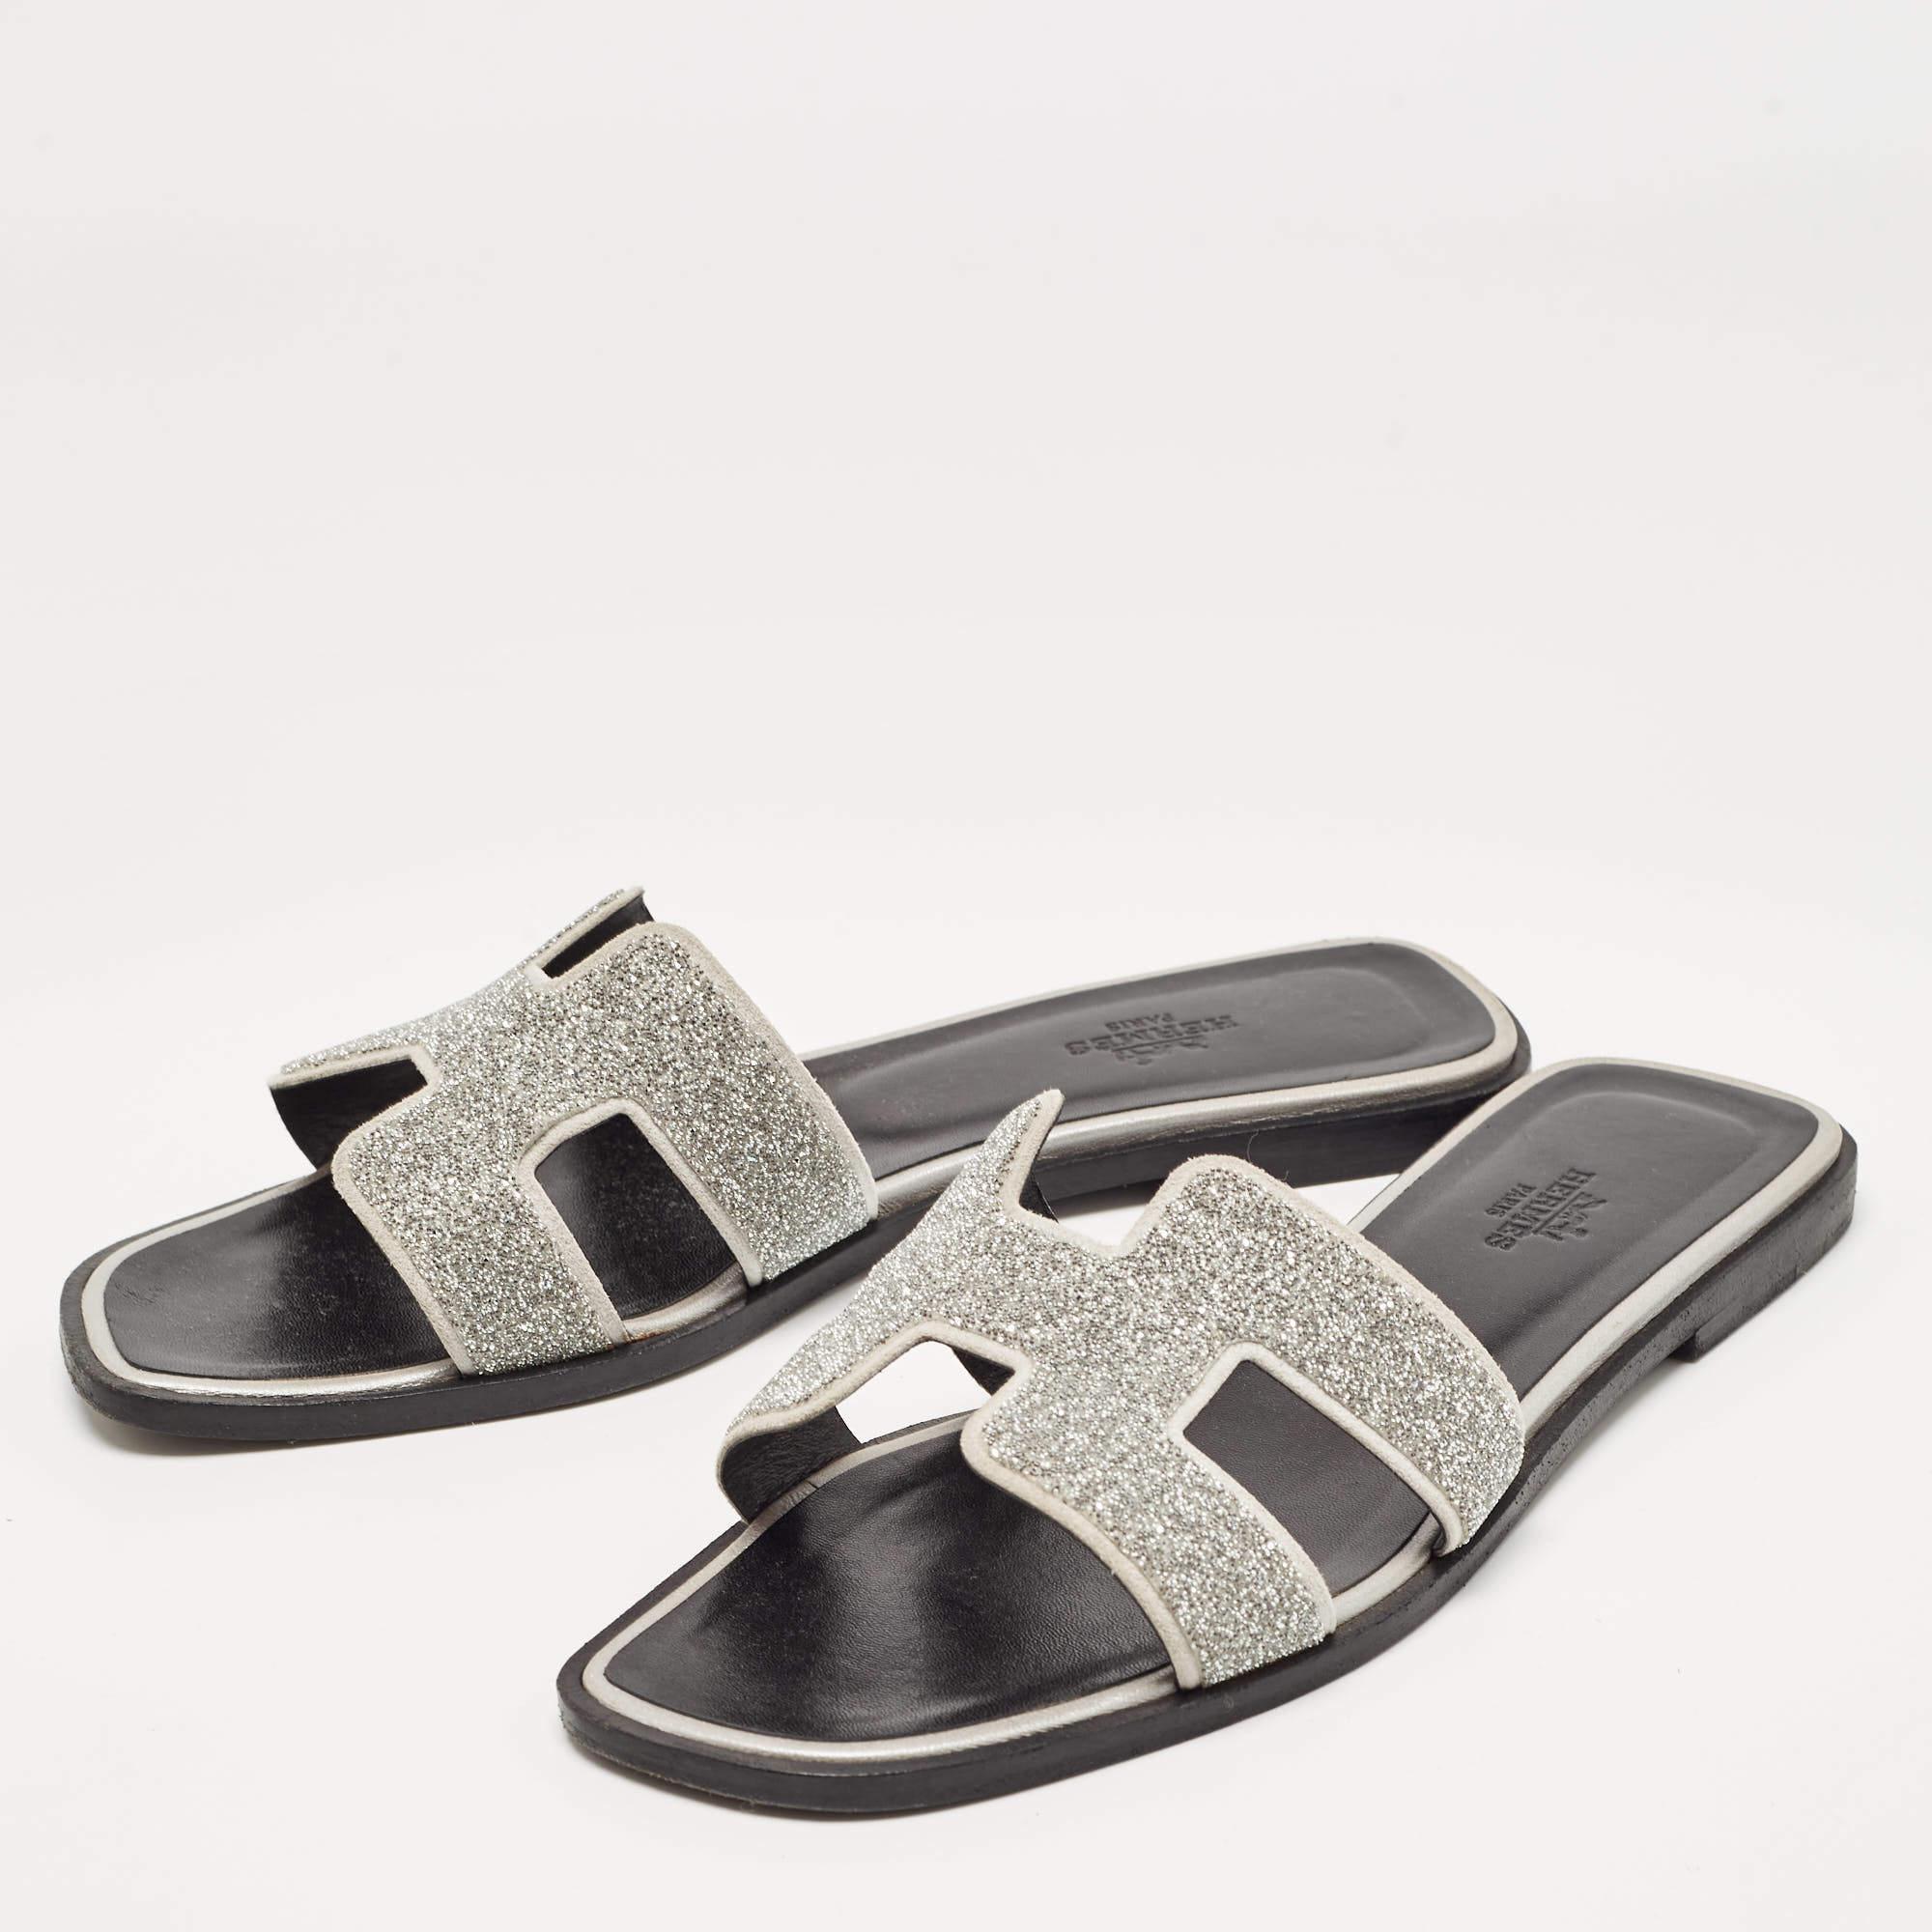 Hermes Silver Suede and Glitter Opne Toe Flat Oran Slides Size 38.5 4